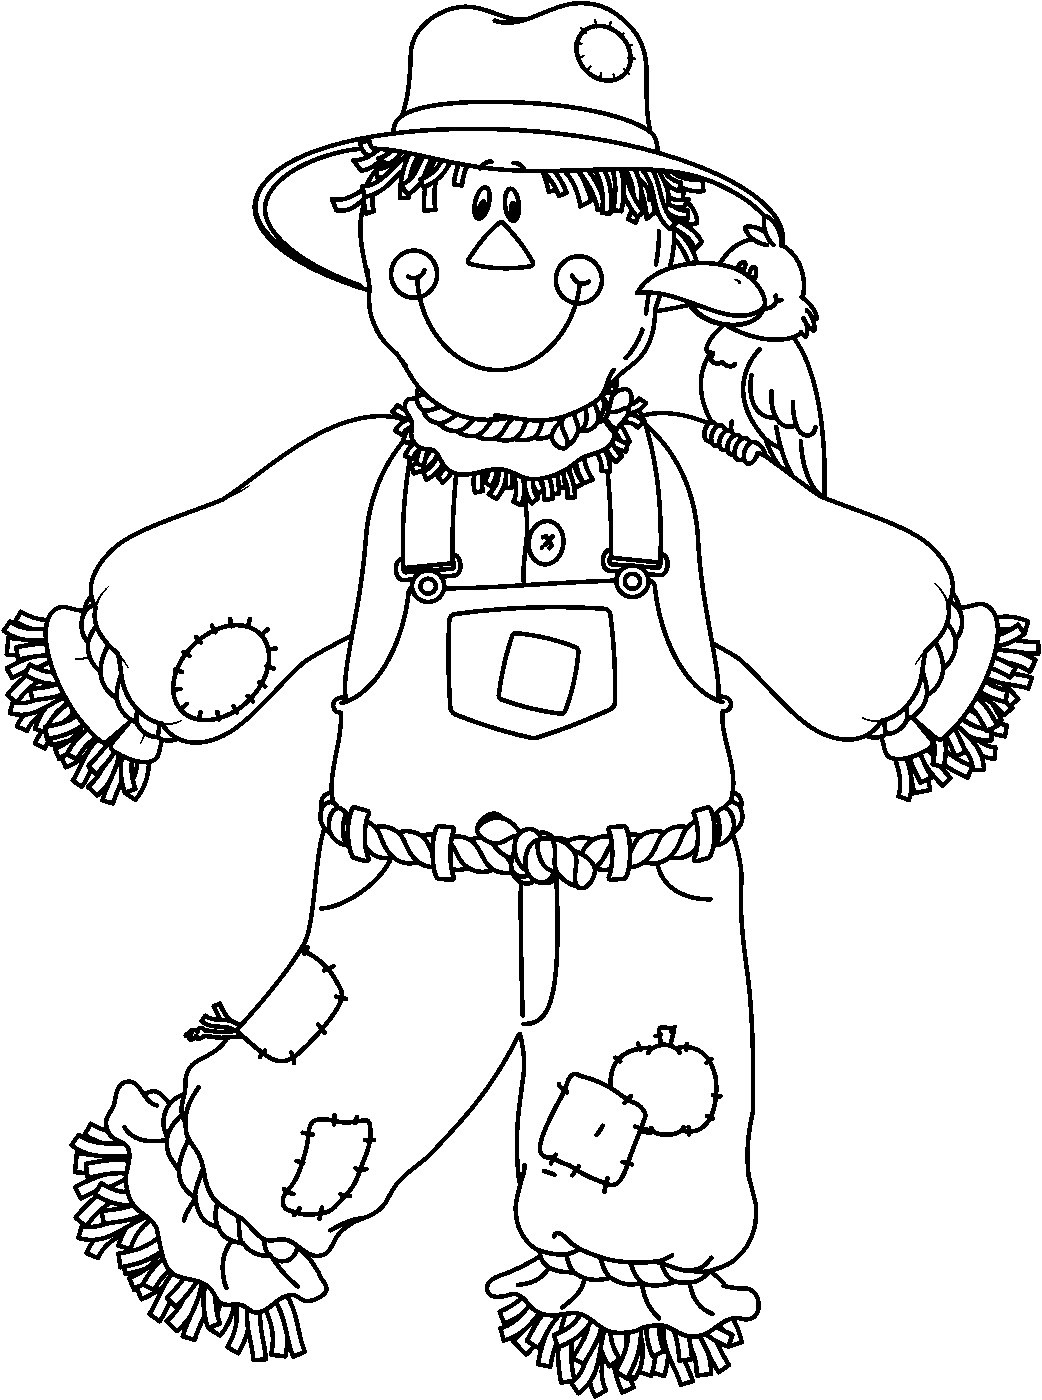 SCARECROW2 BW bmp 1 042 1 400 Pixels Scarecrow Coloring Pages Free Printable Free Halloween